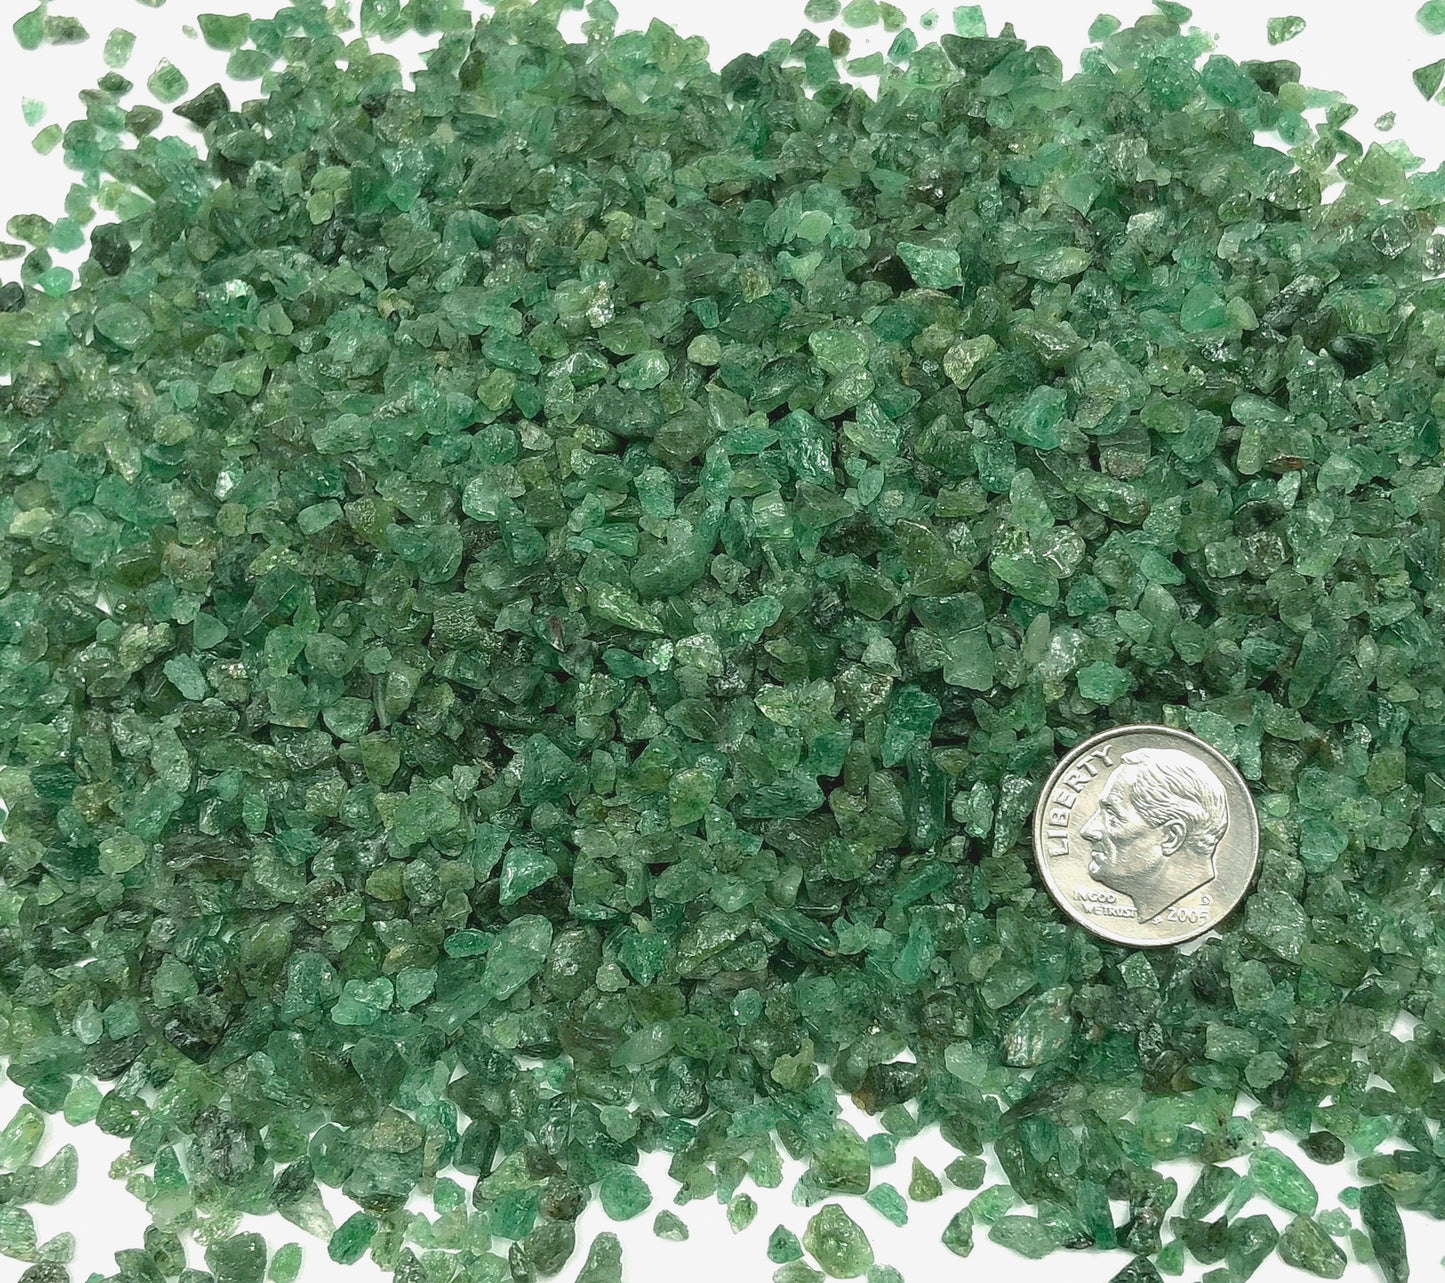 Crushed Green Emerald (Grade A) from India, Coarse Crush, Gravel Size, 4mm - 2mm